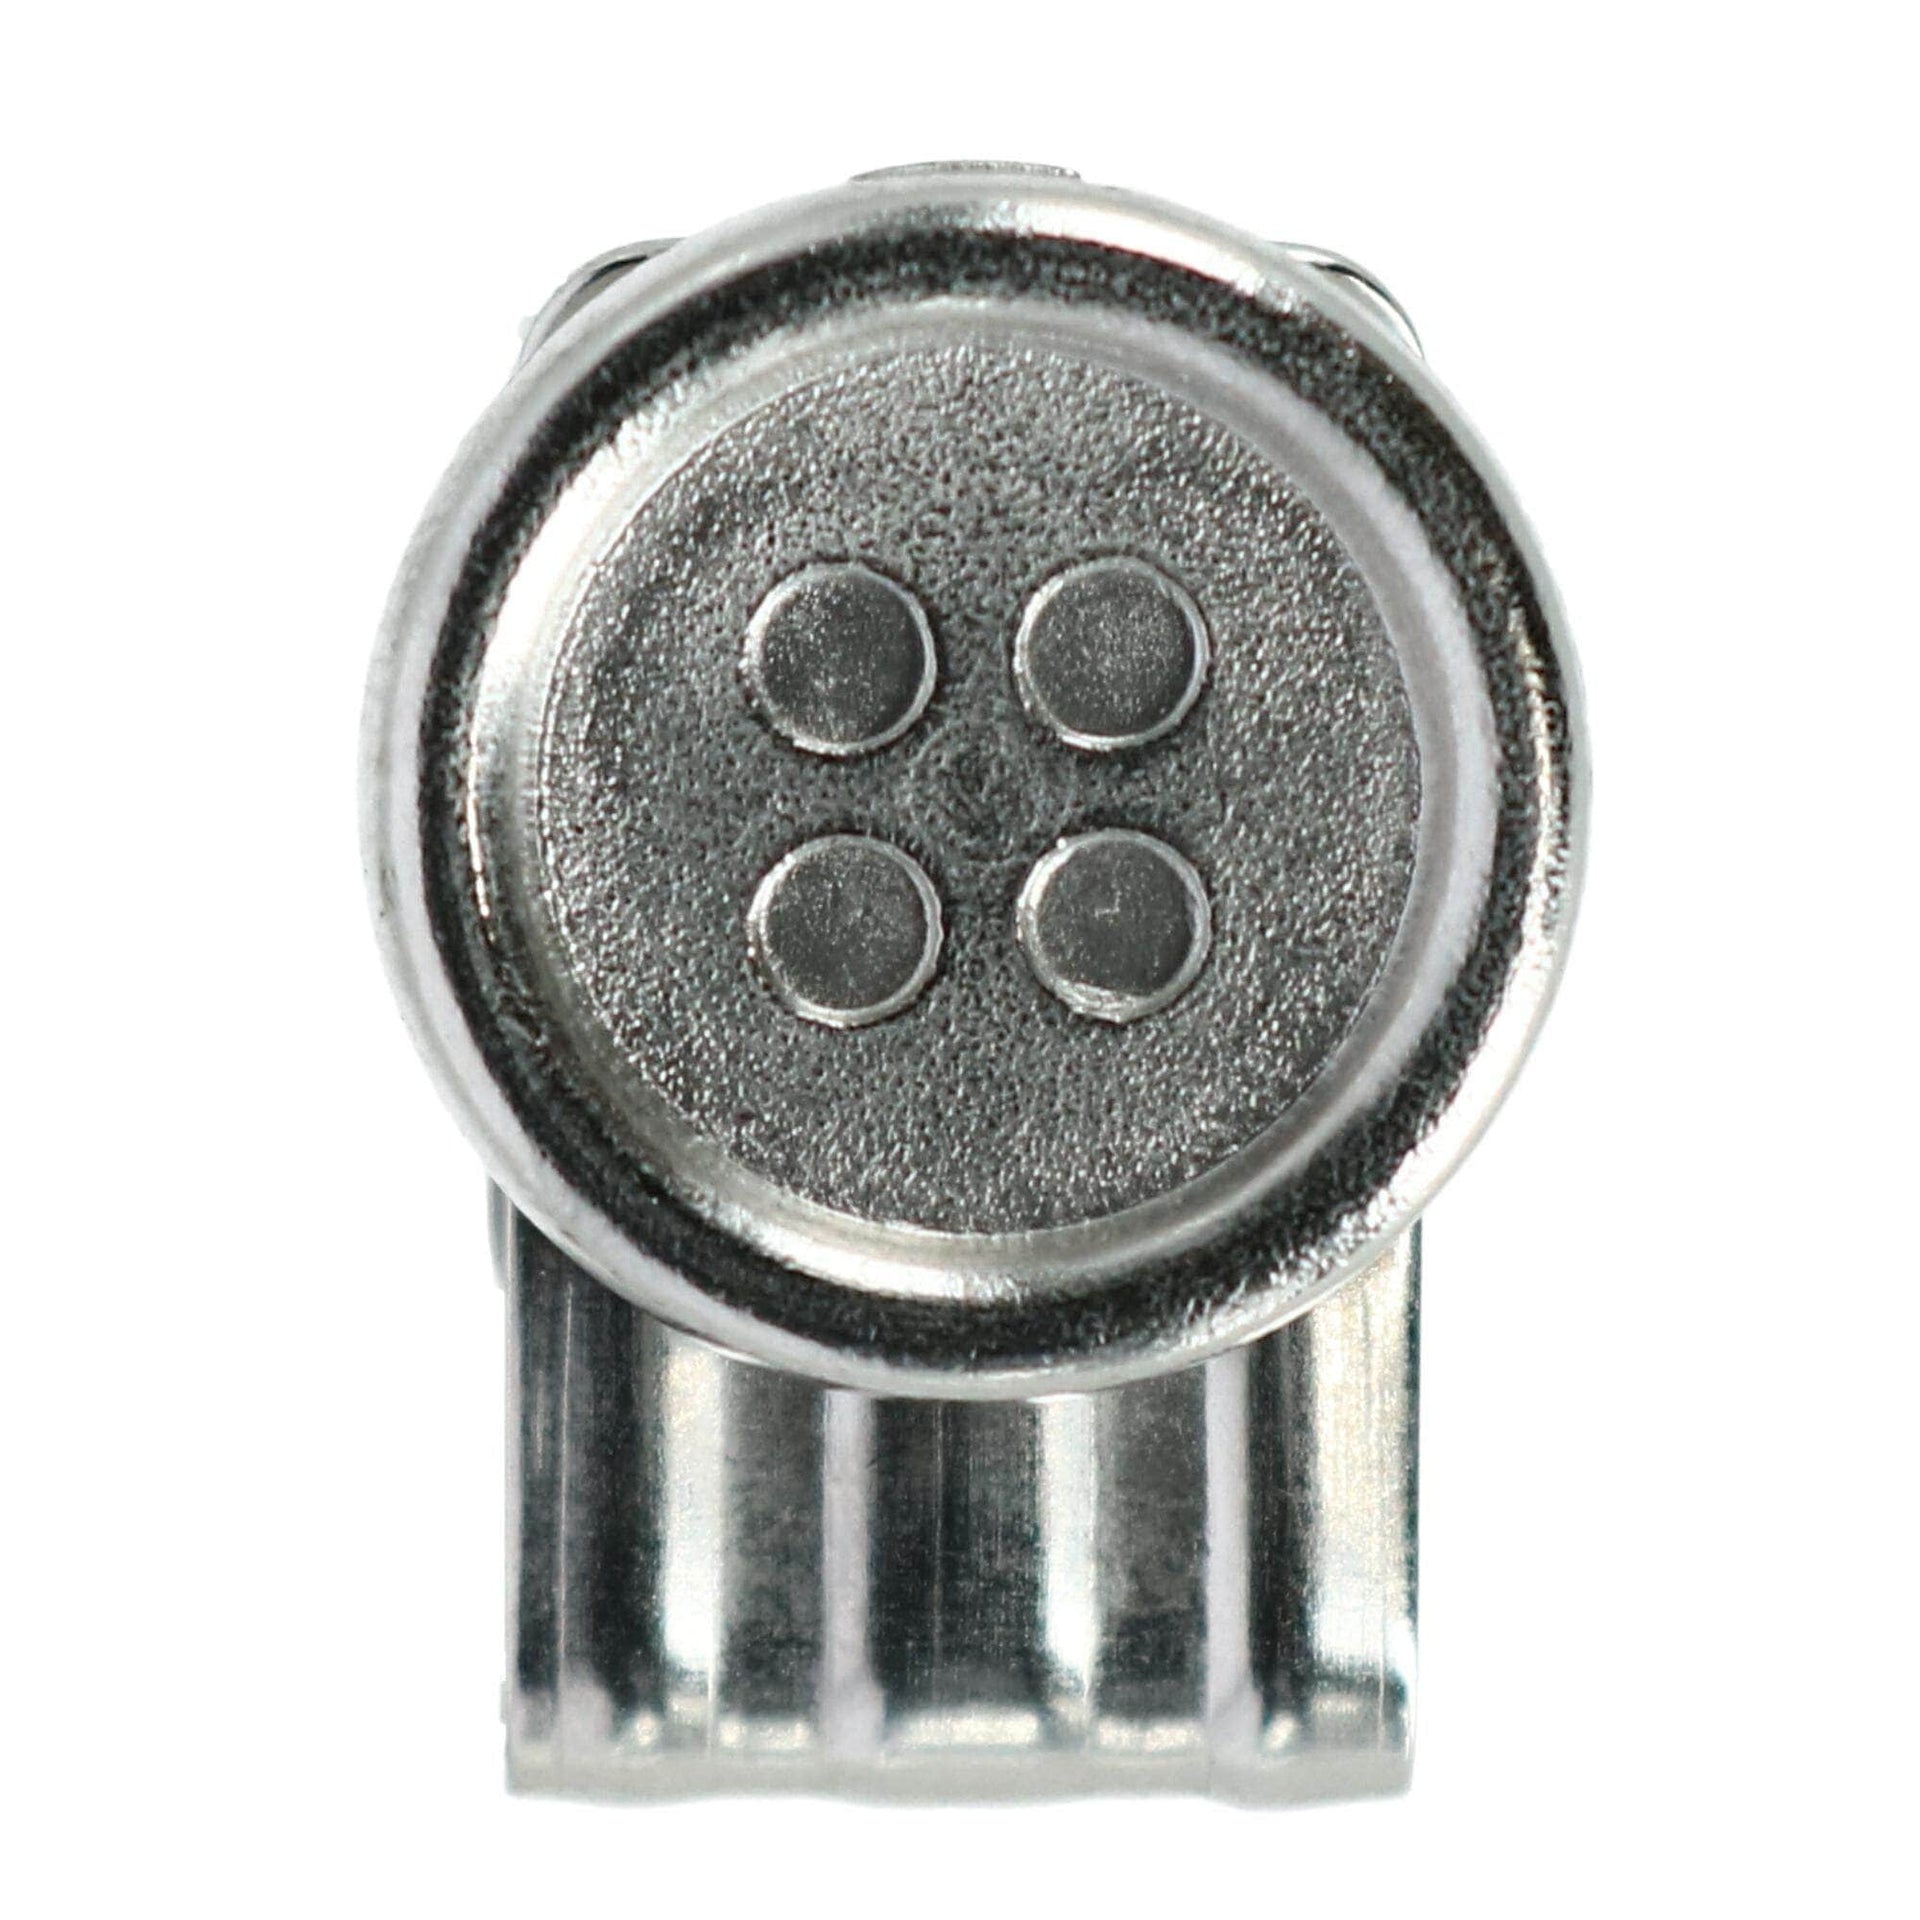 Button Clips from Magrenko Ltd